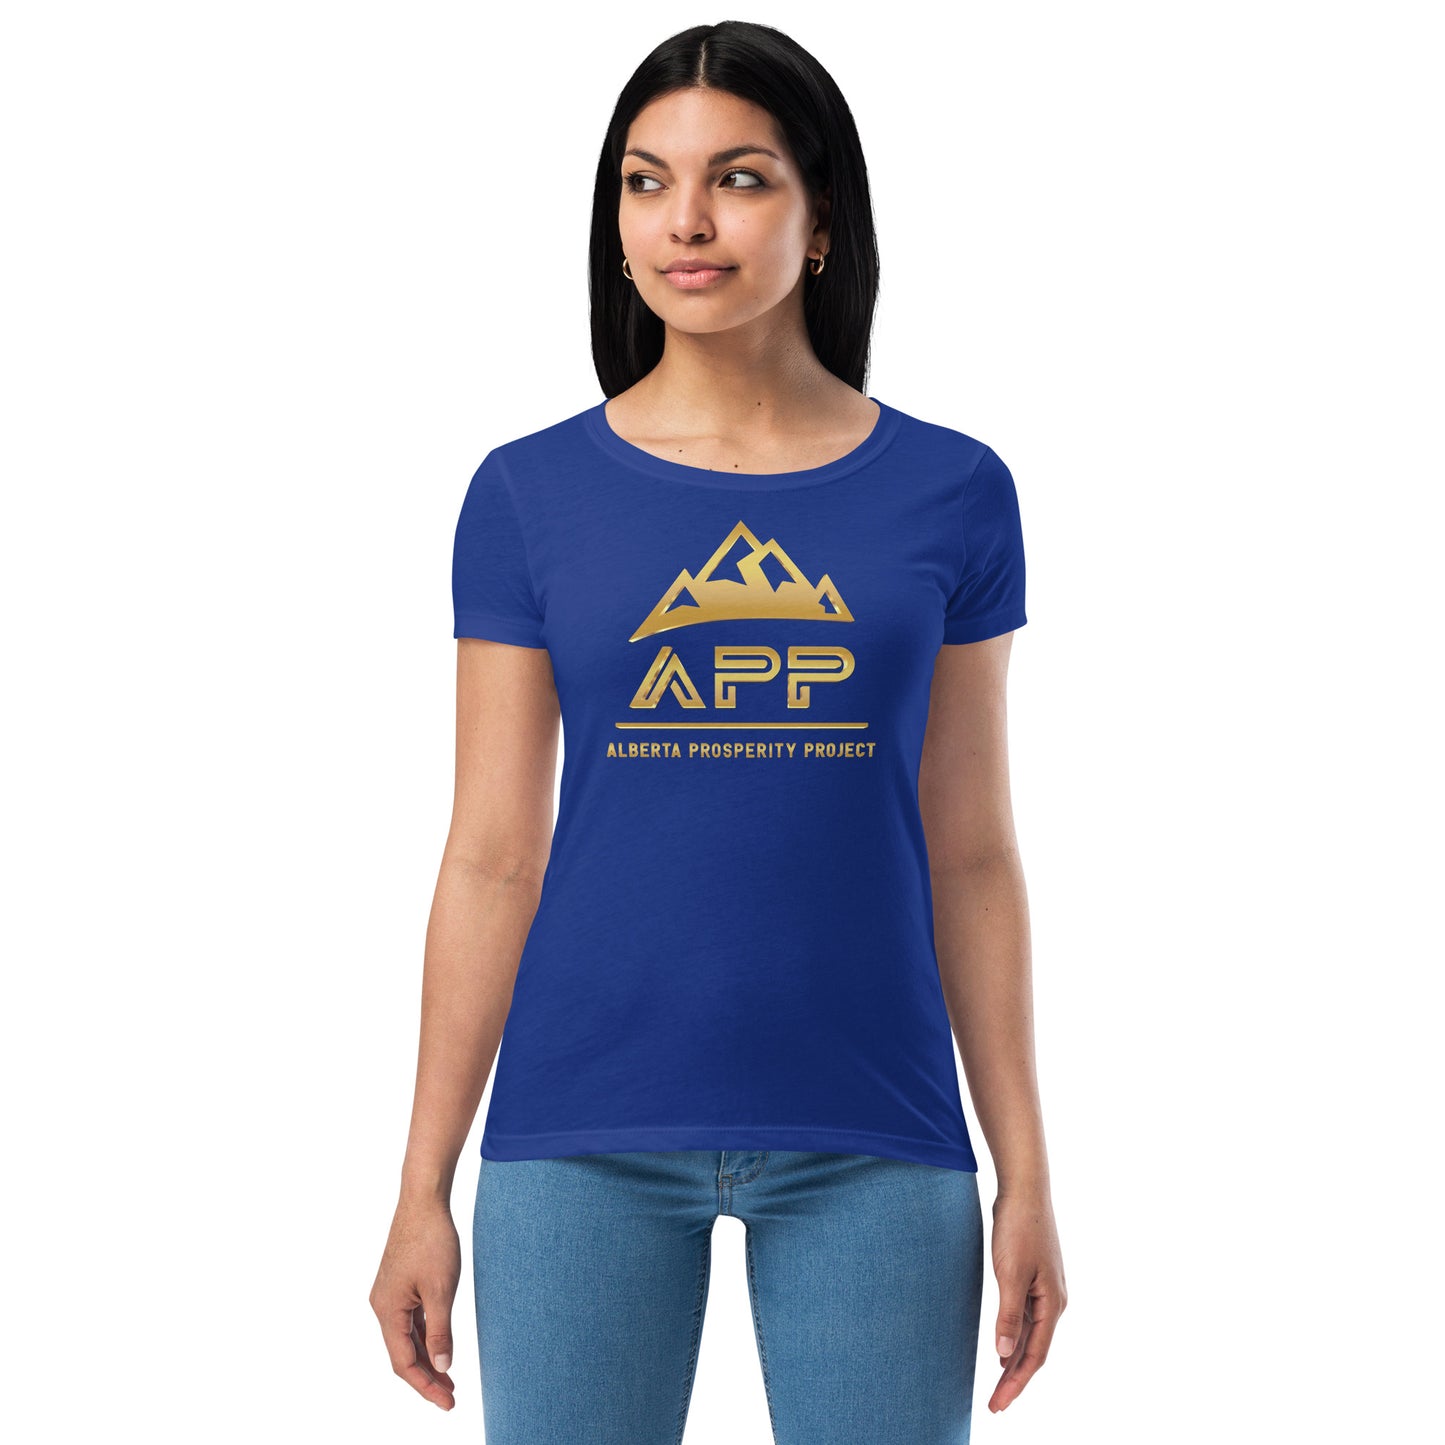 APP Women’s fitted t-shirt - Royal Blue